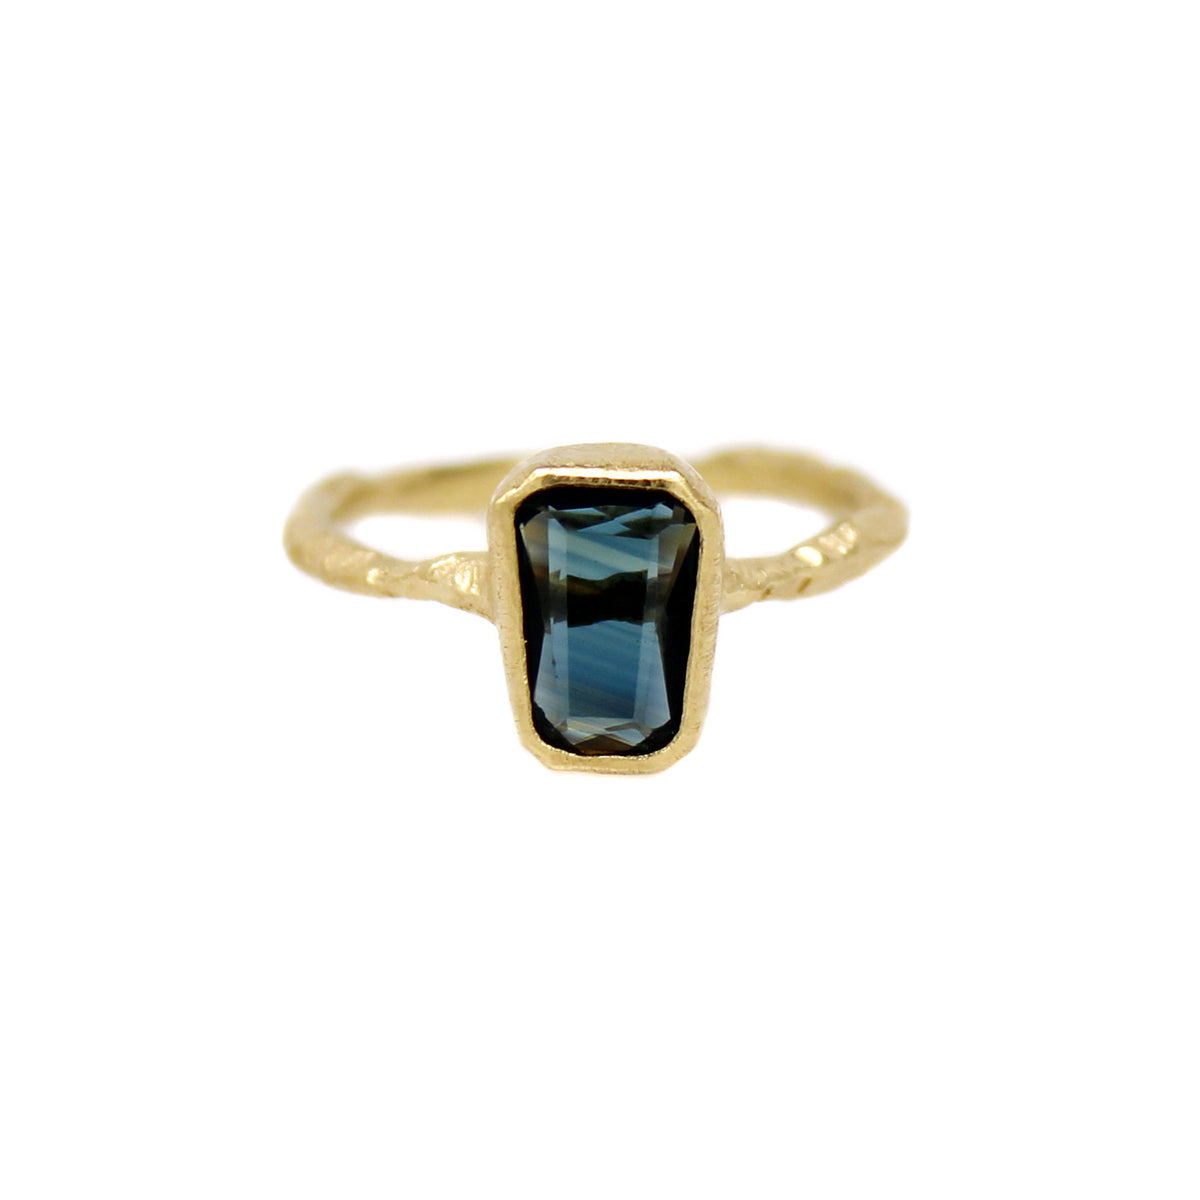 One-of-a-Kind Narrow Crest Sapphire Ring